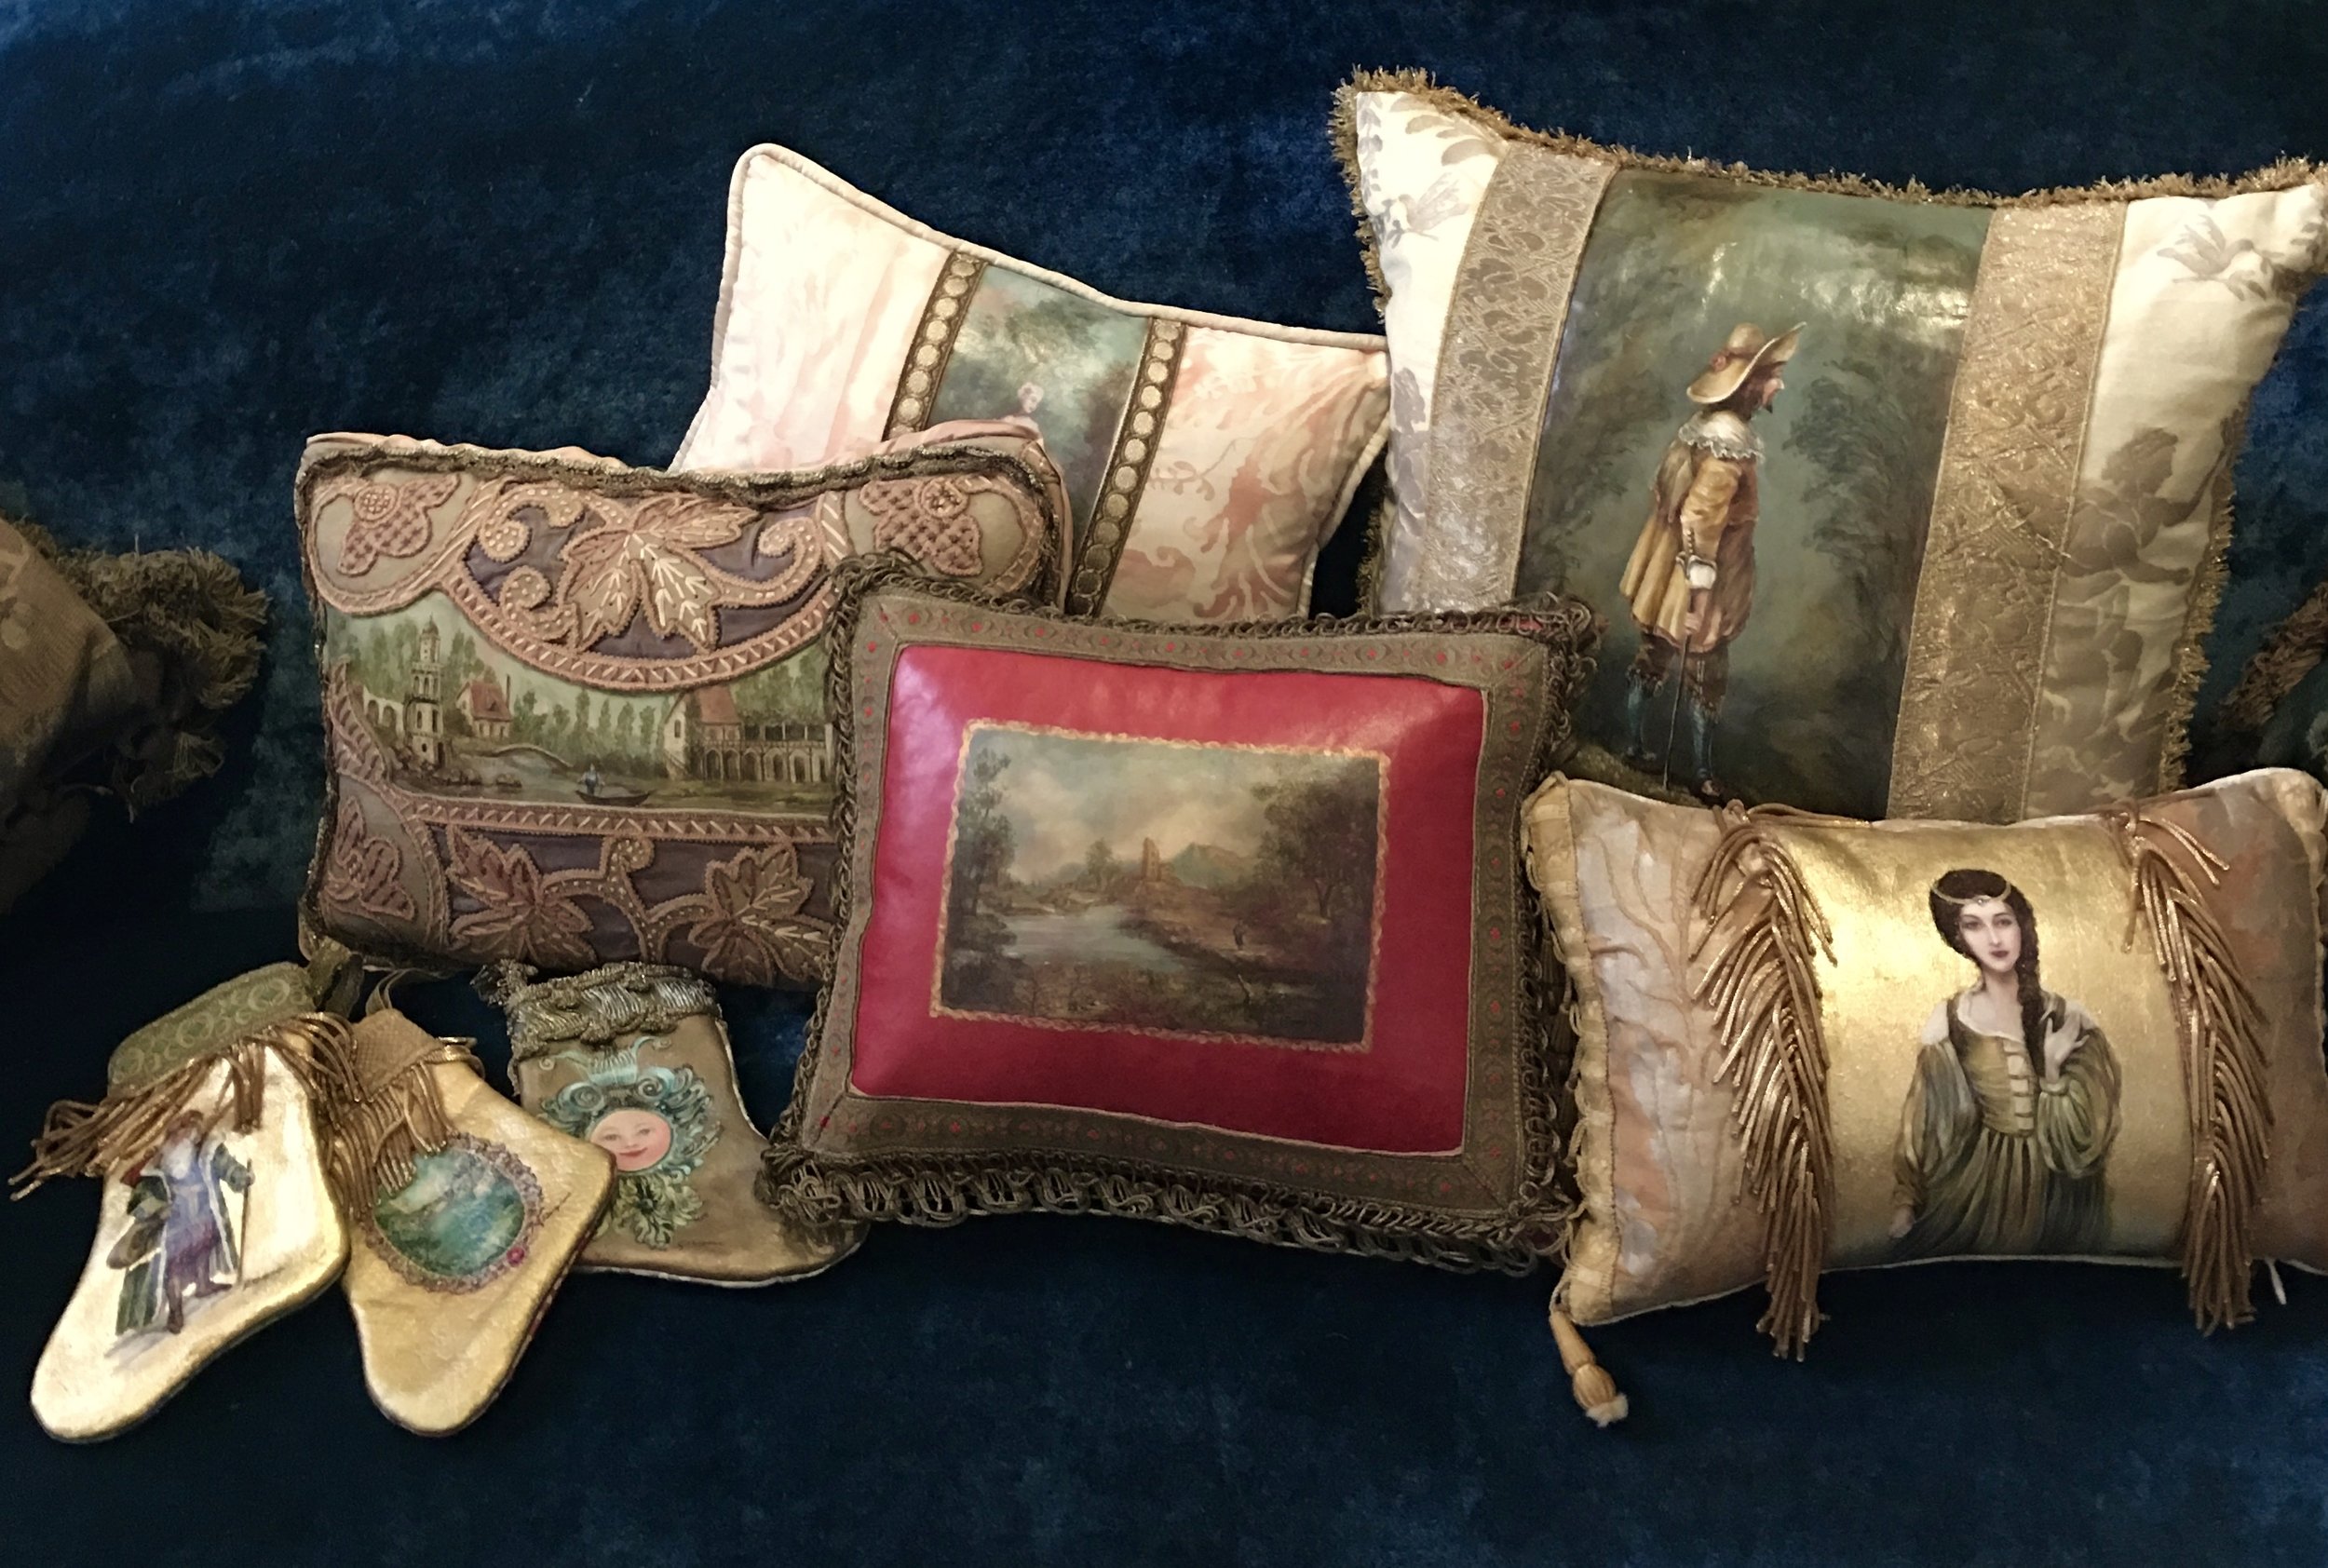 Pillows and Stockings from the Masterpiece Collection by Jennifer Chapman